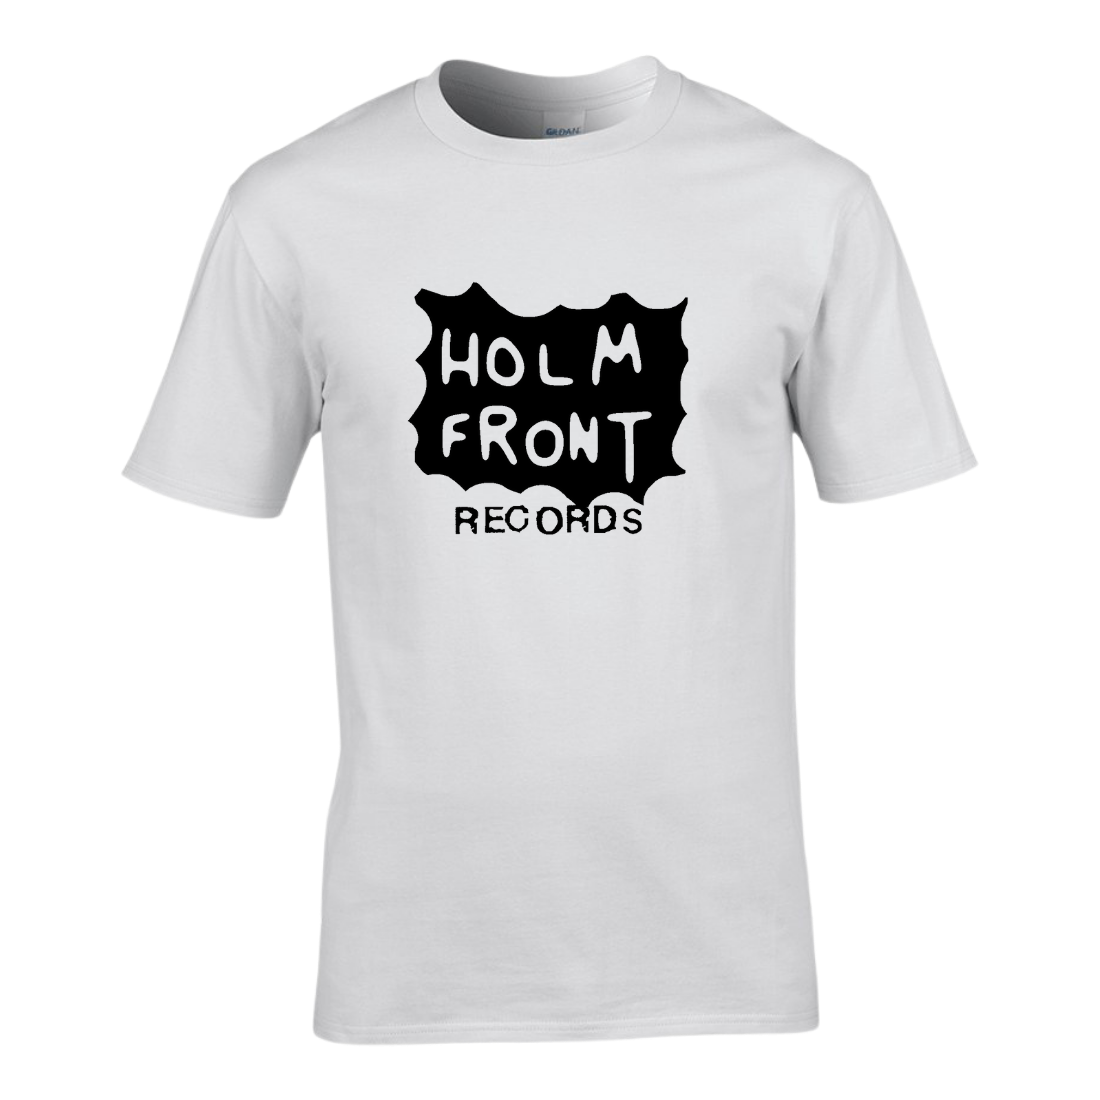 Sports Team - Holm Front Records Tee 